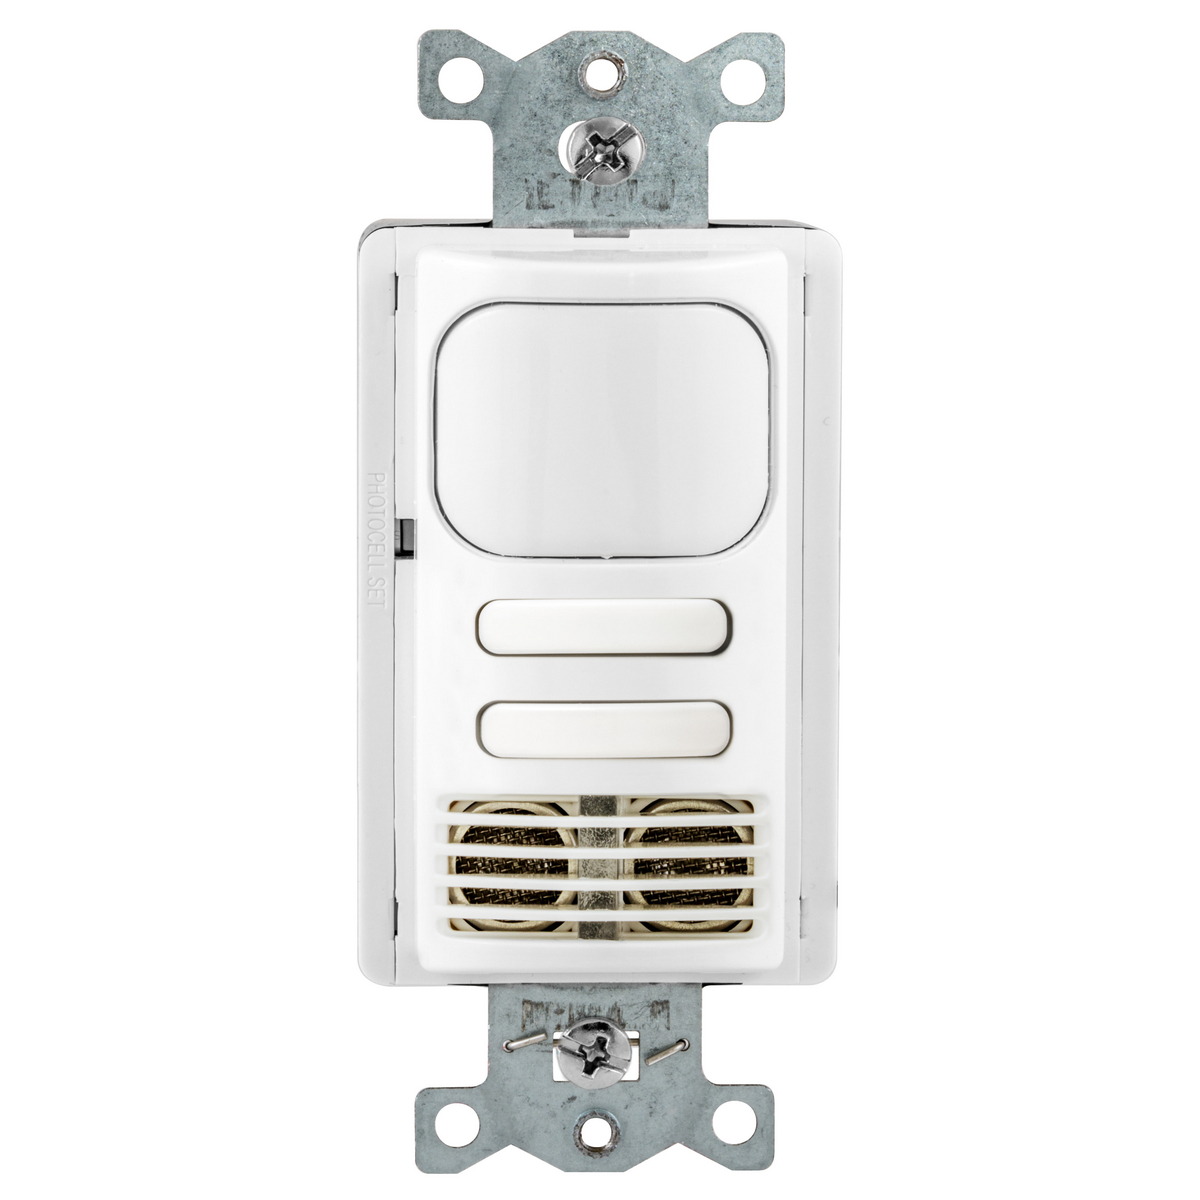 AD2000W22 Wall Switch Sensor Hubbell Incorporated (Wiring Device-Kellems);Hubbell Wiring Device-Kellems